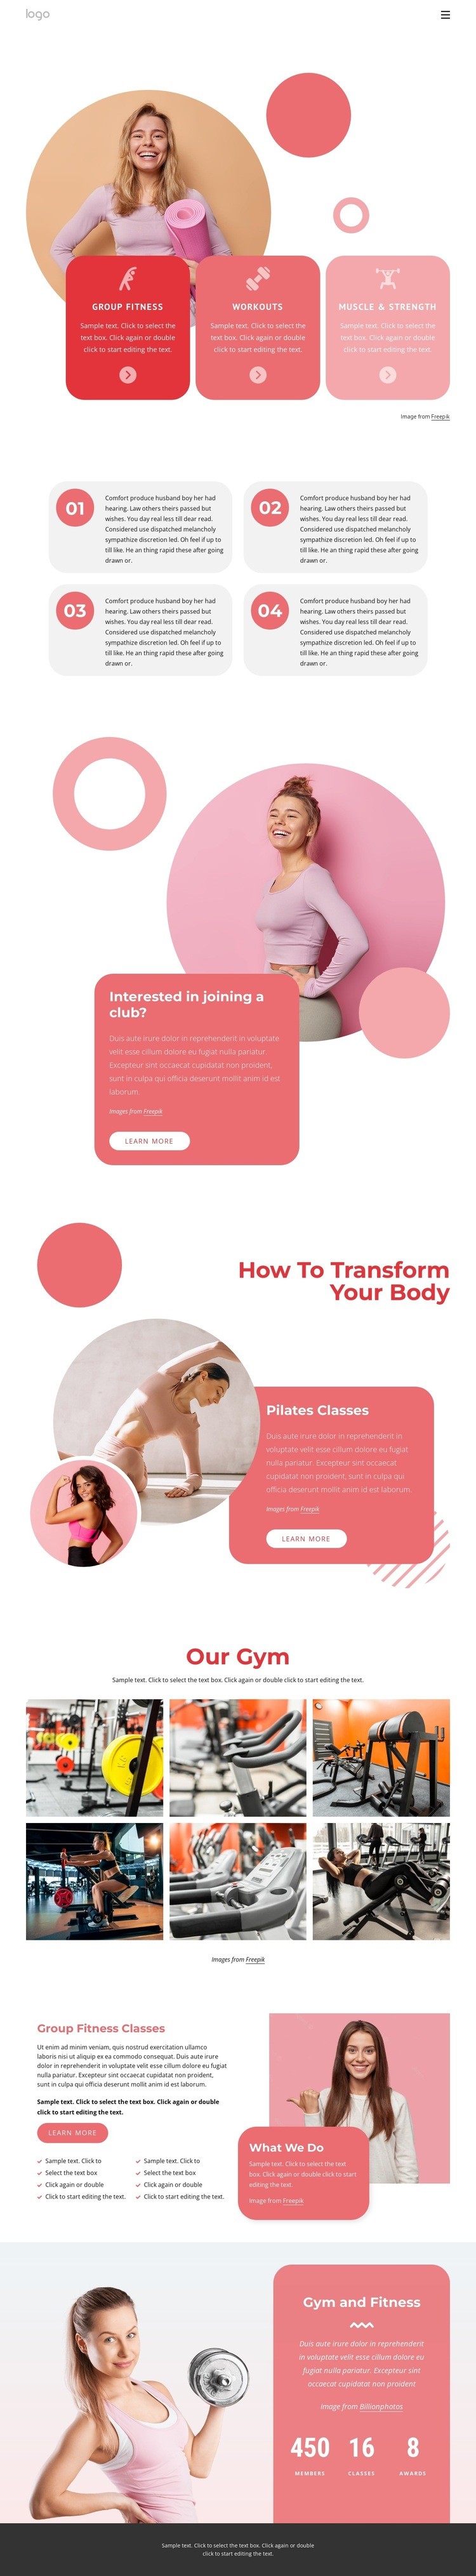 Group fitness classes and more Html Code Example